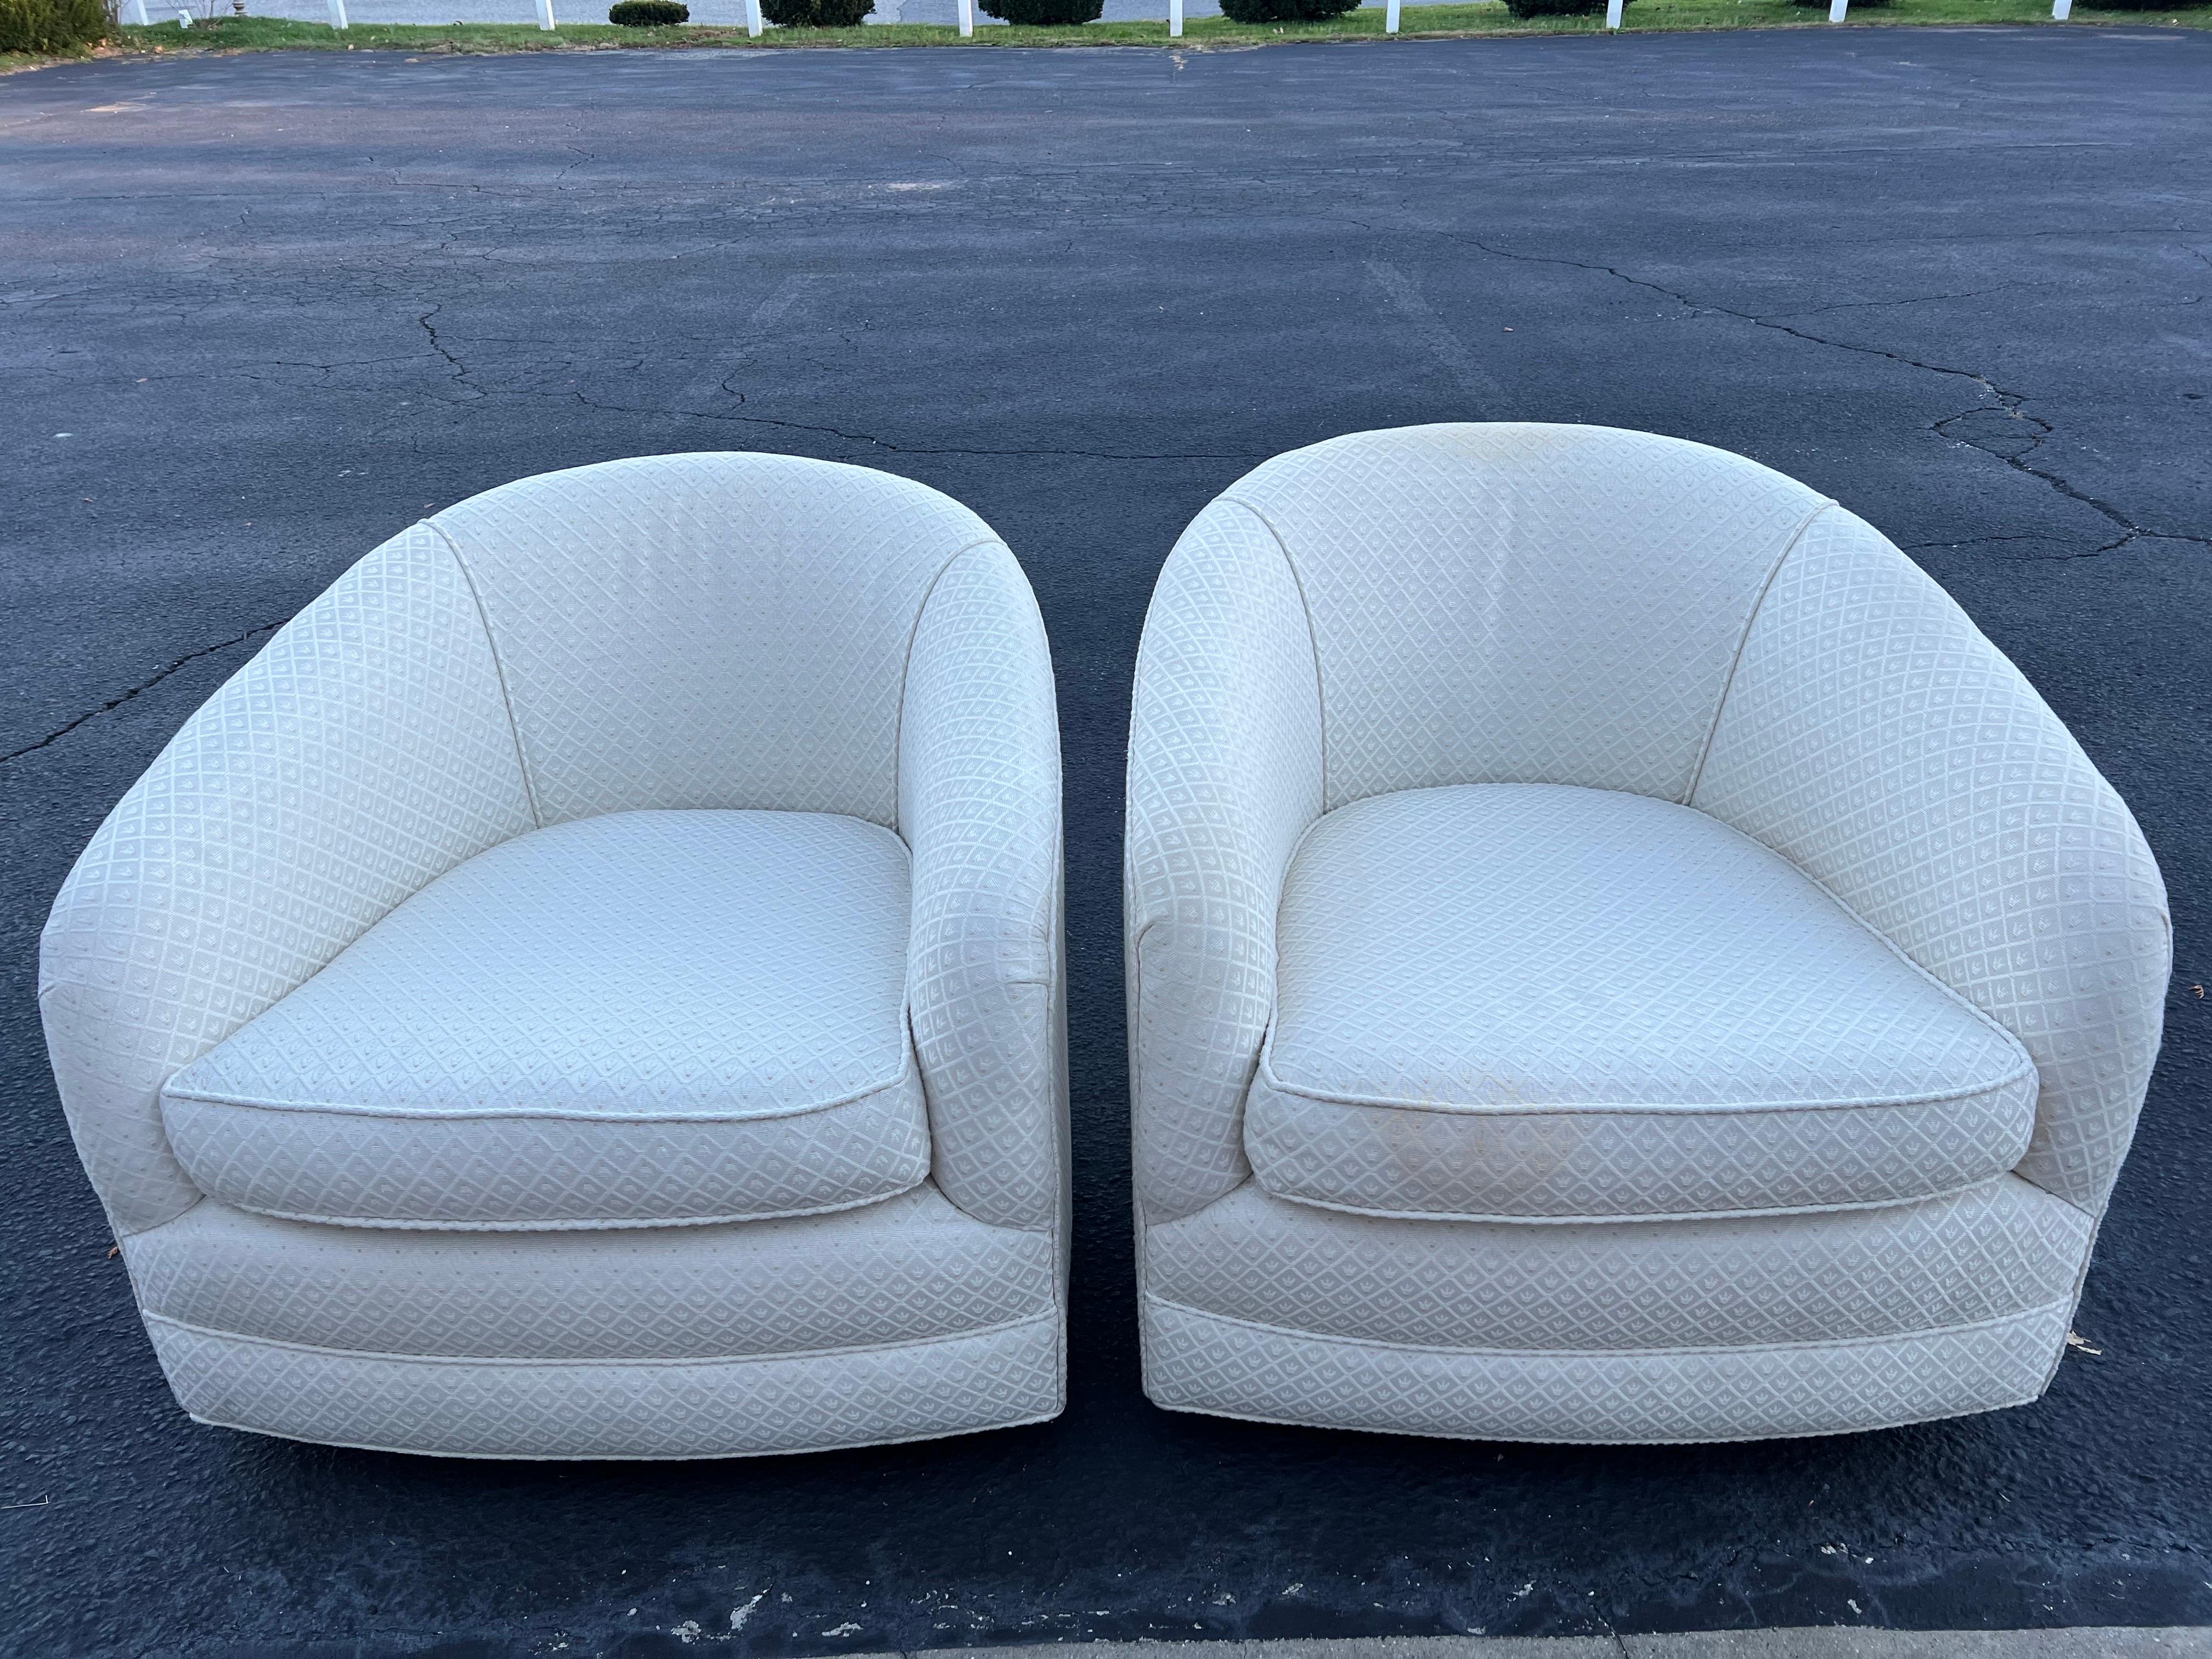 Pair of Creamy White Swivel Cube Chairs. Classic, timeless styling. Nice neutral pair with durable upholstery. One chair has a swivel and the other has a swivel and a rocker. Although one can easily change the rocker to just a swivel base if needed. 